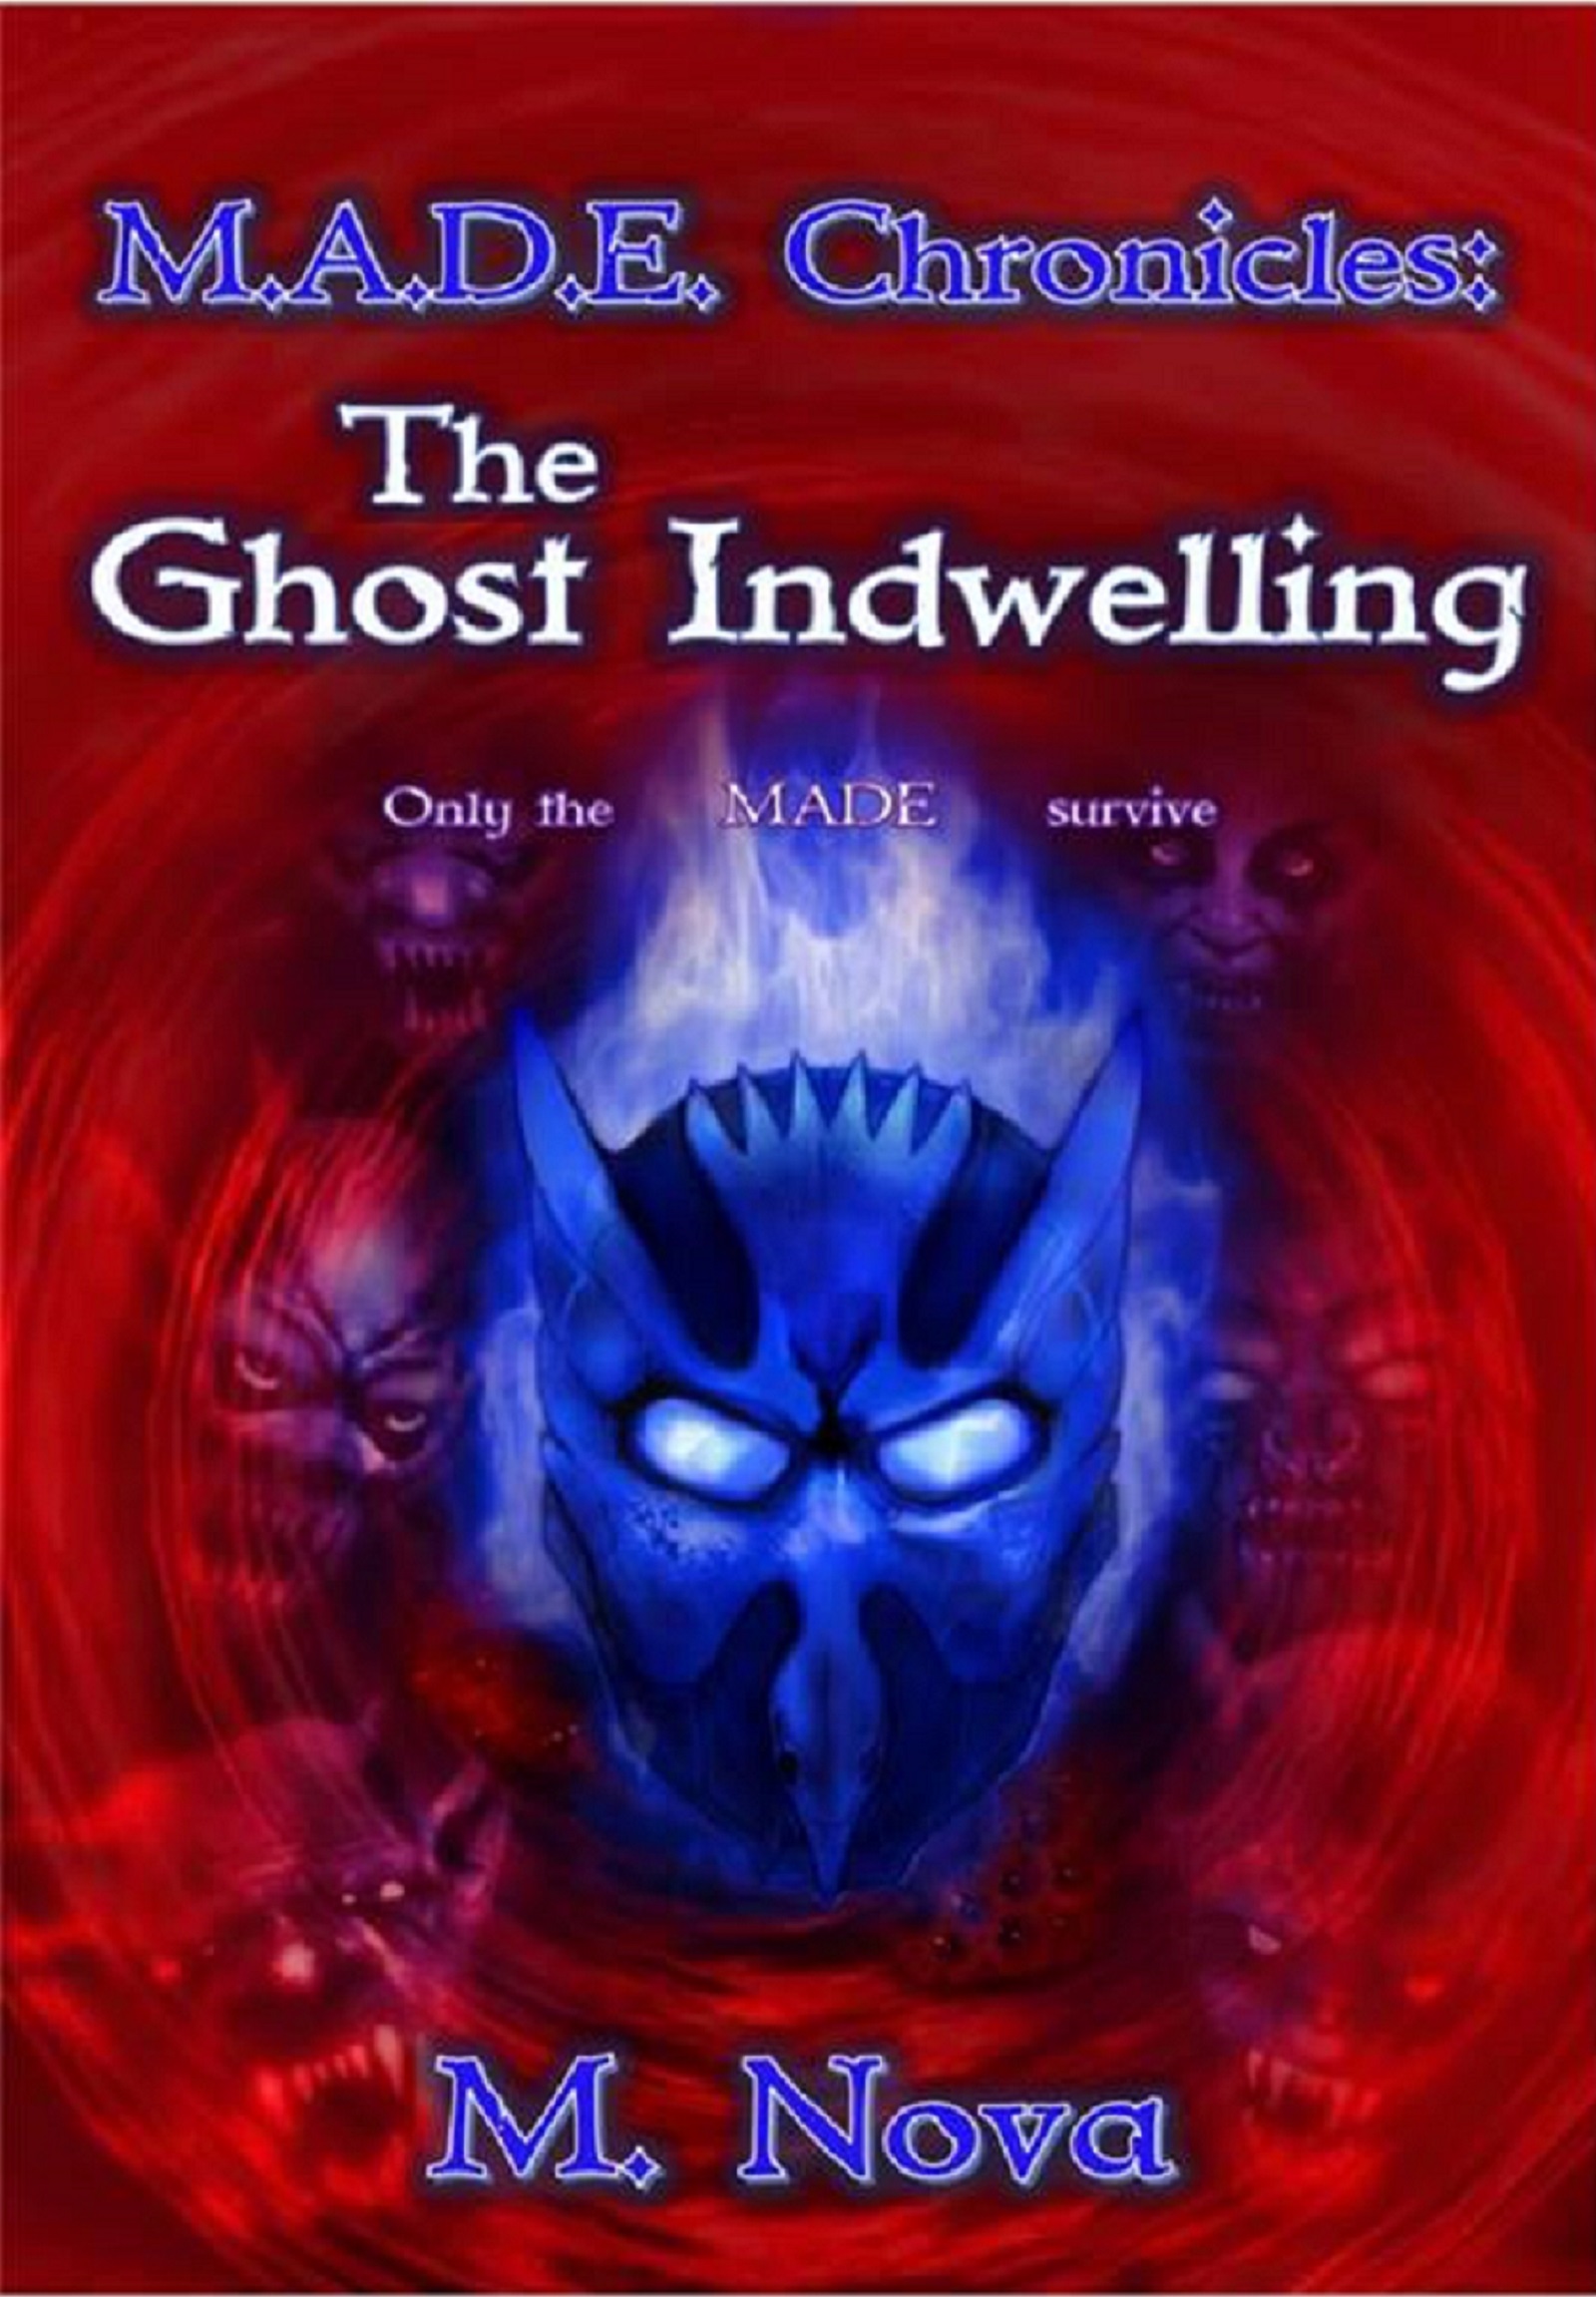 FREE: M.A.D.E. Chronicles: The Ghost Indwelling by M. Nova